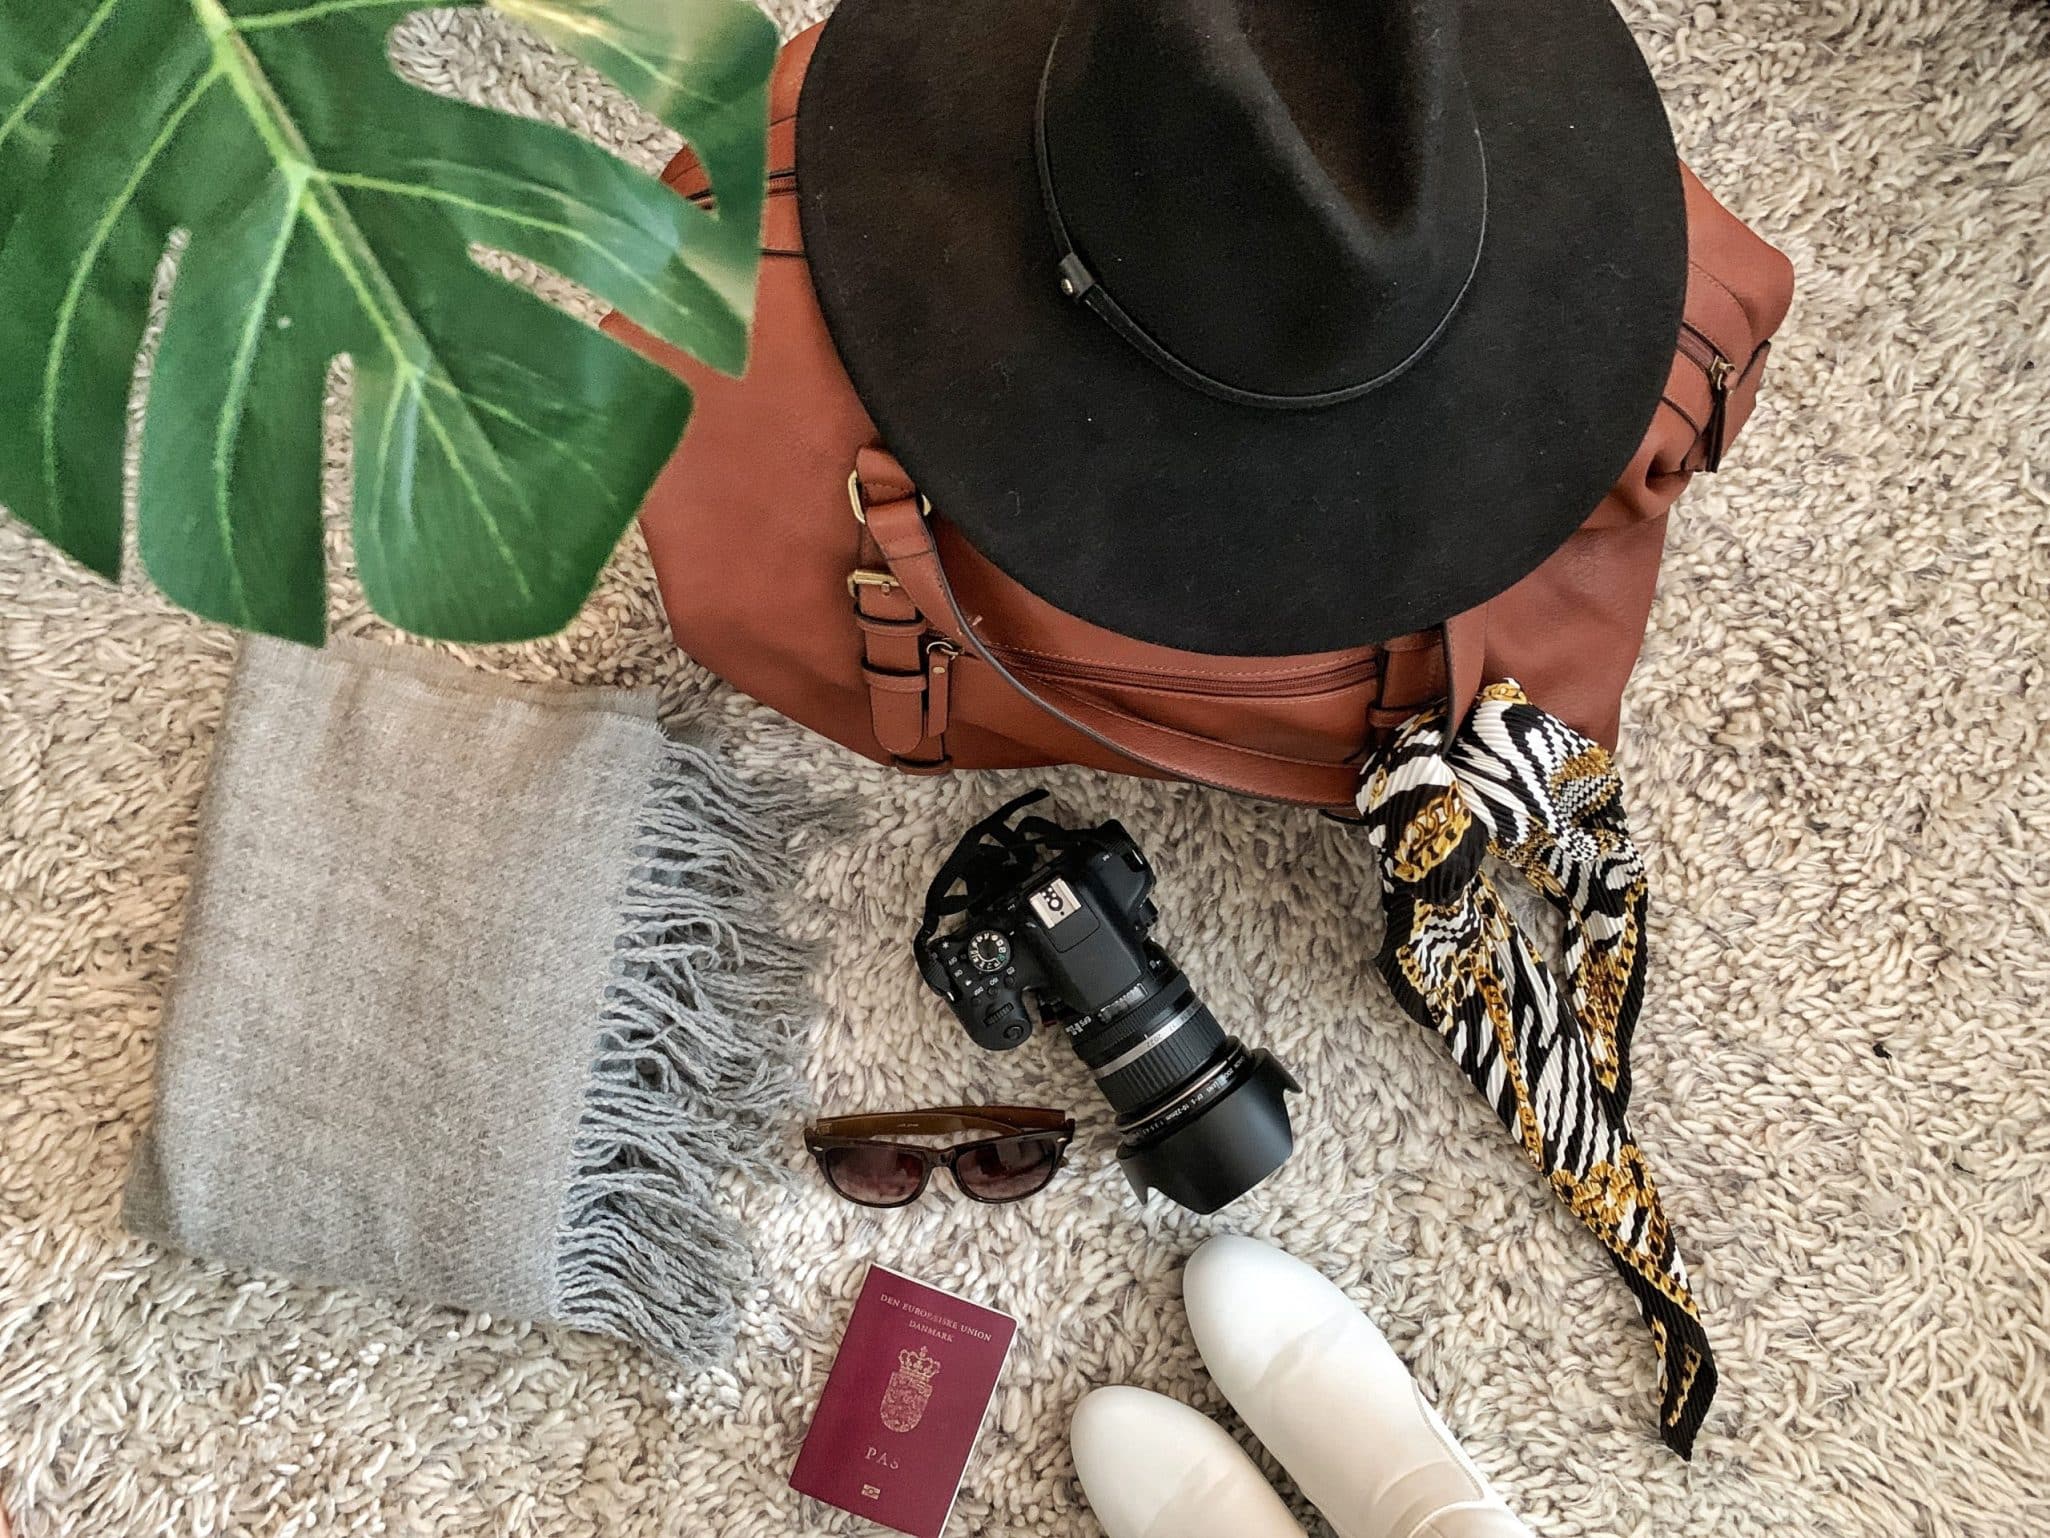 Ultimate carry-on packing list for long or short flights